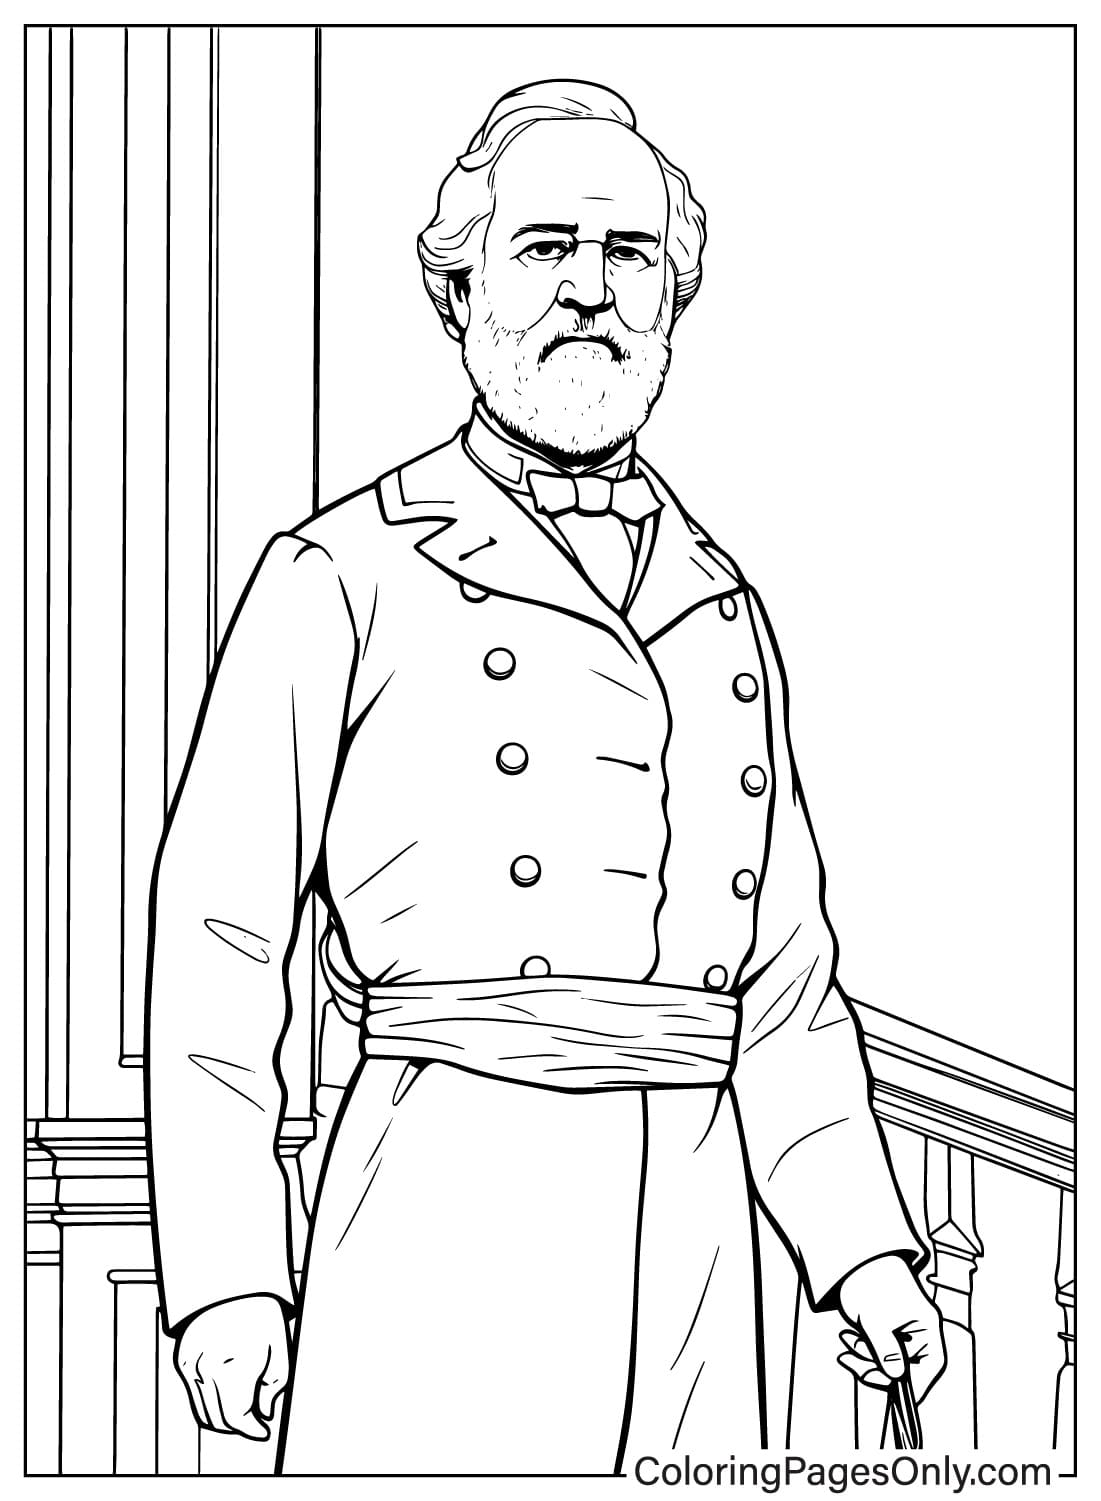 Coloring page robert e lee